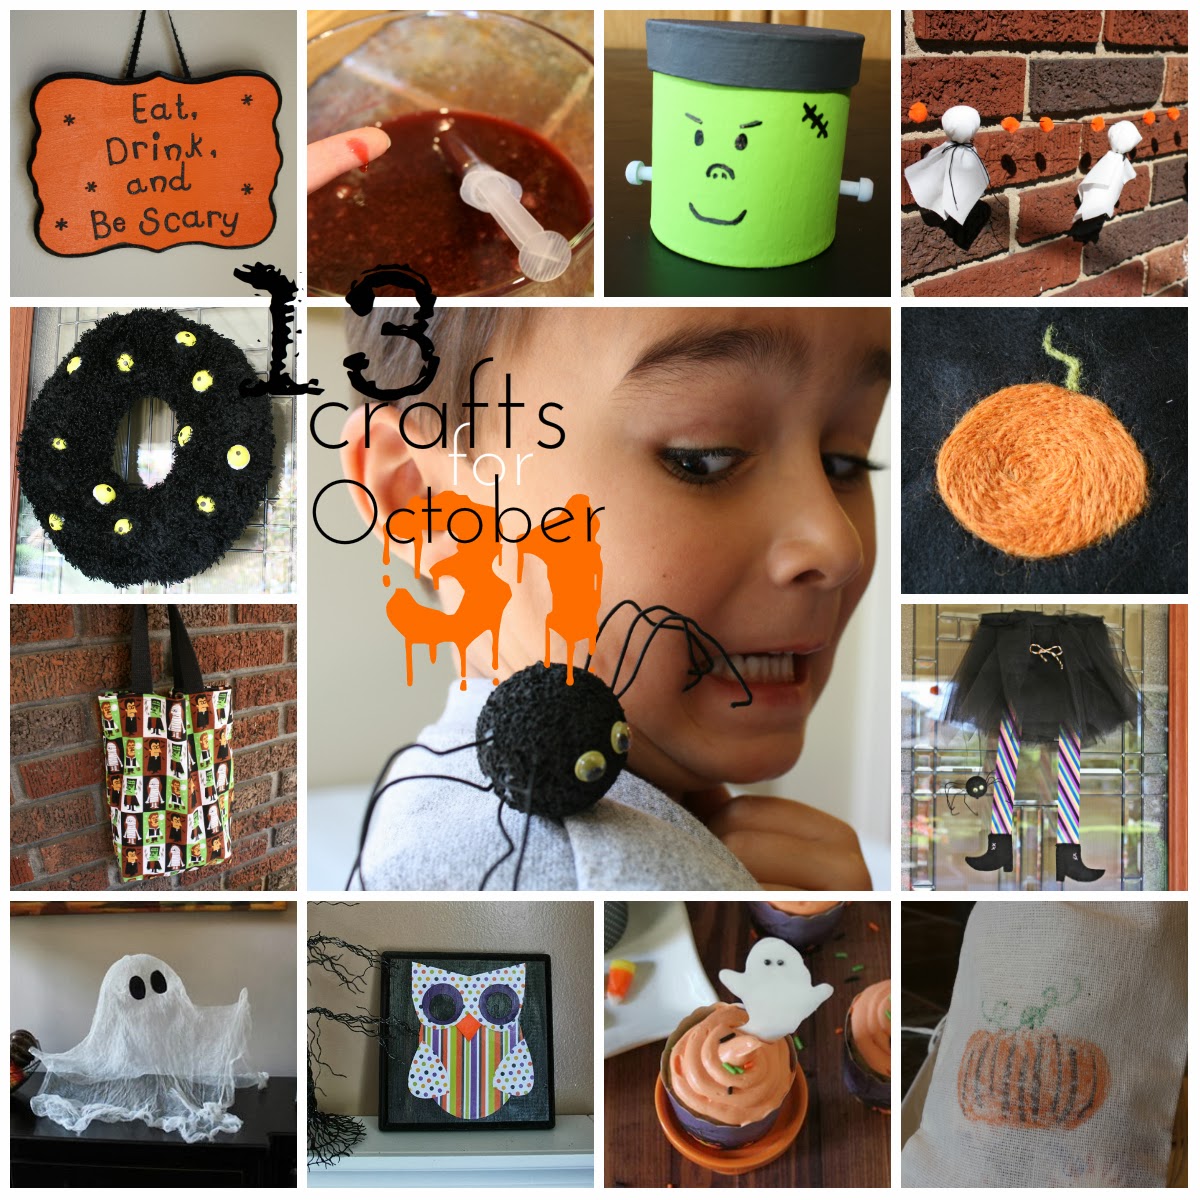 Craft E Magee: 13 Crafts for October 31